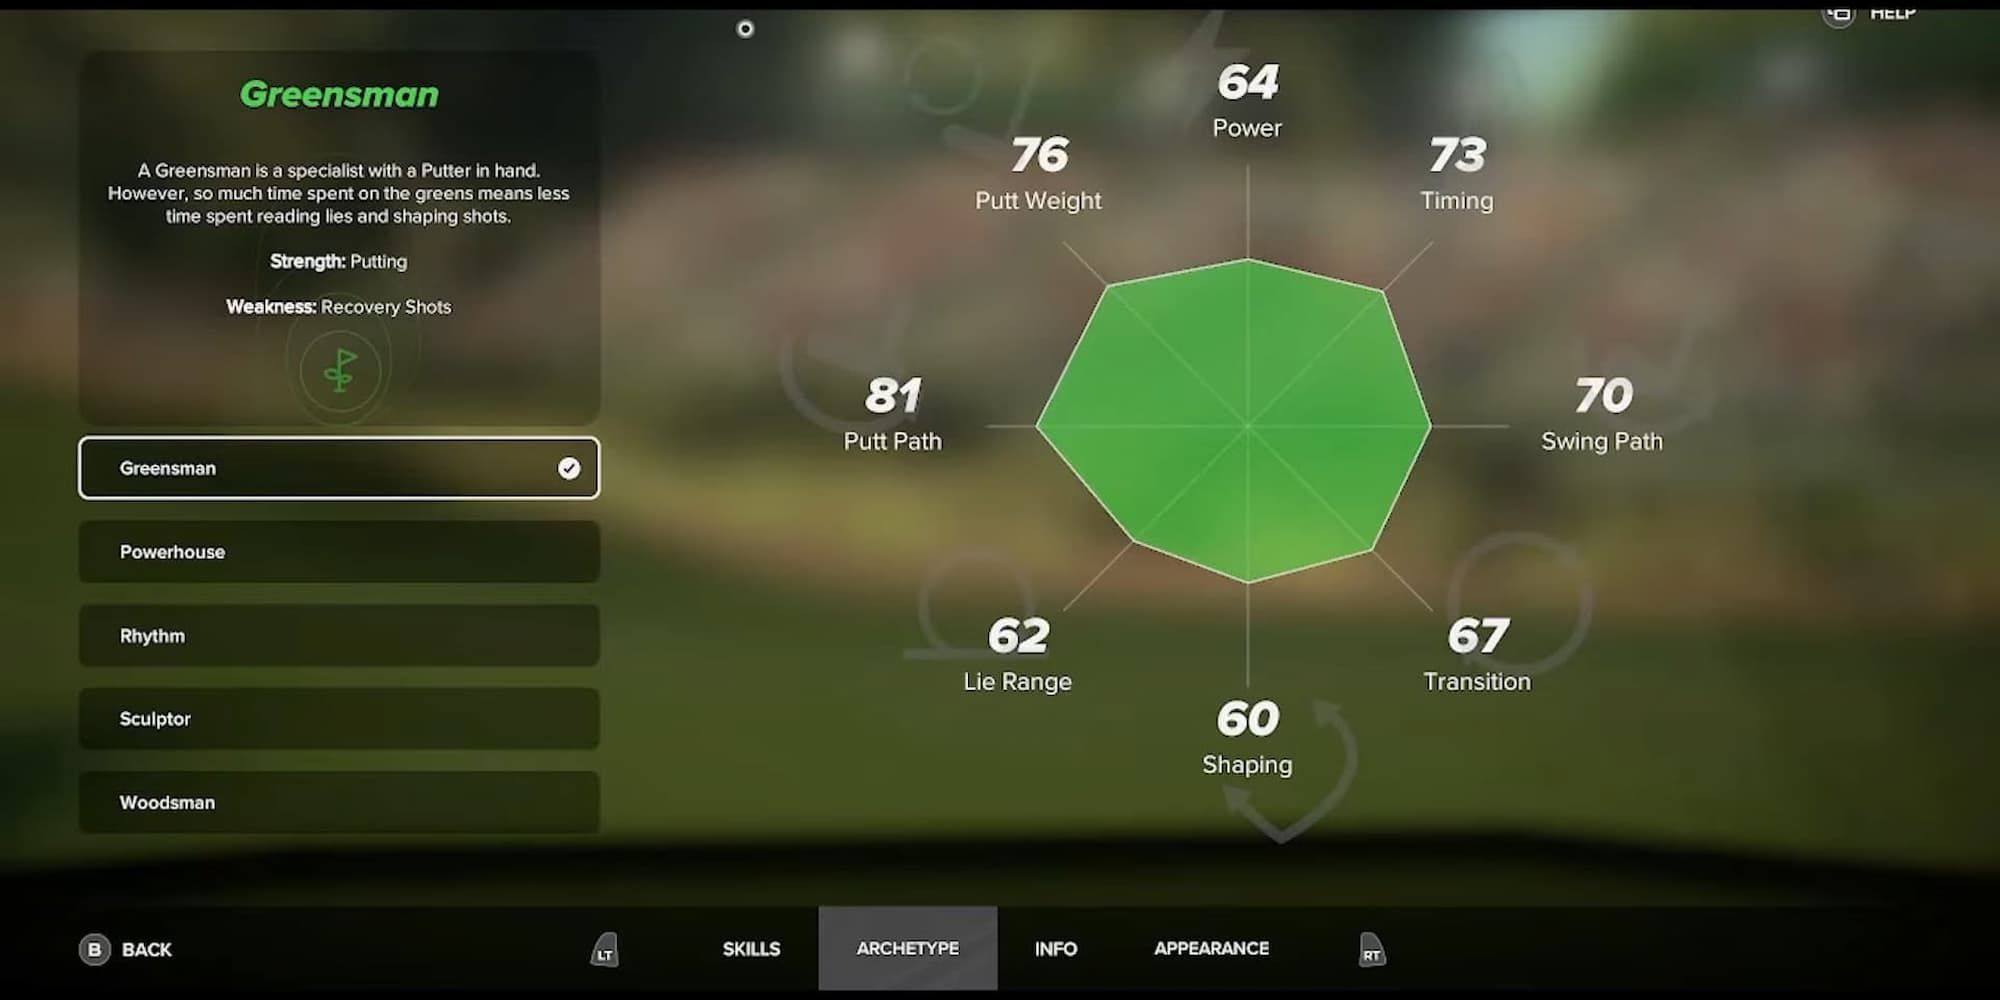 The Greensman shows high stats in the putting categories.